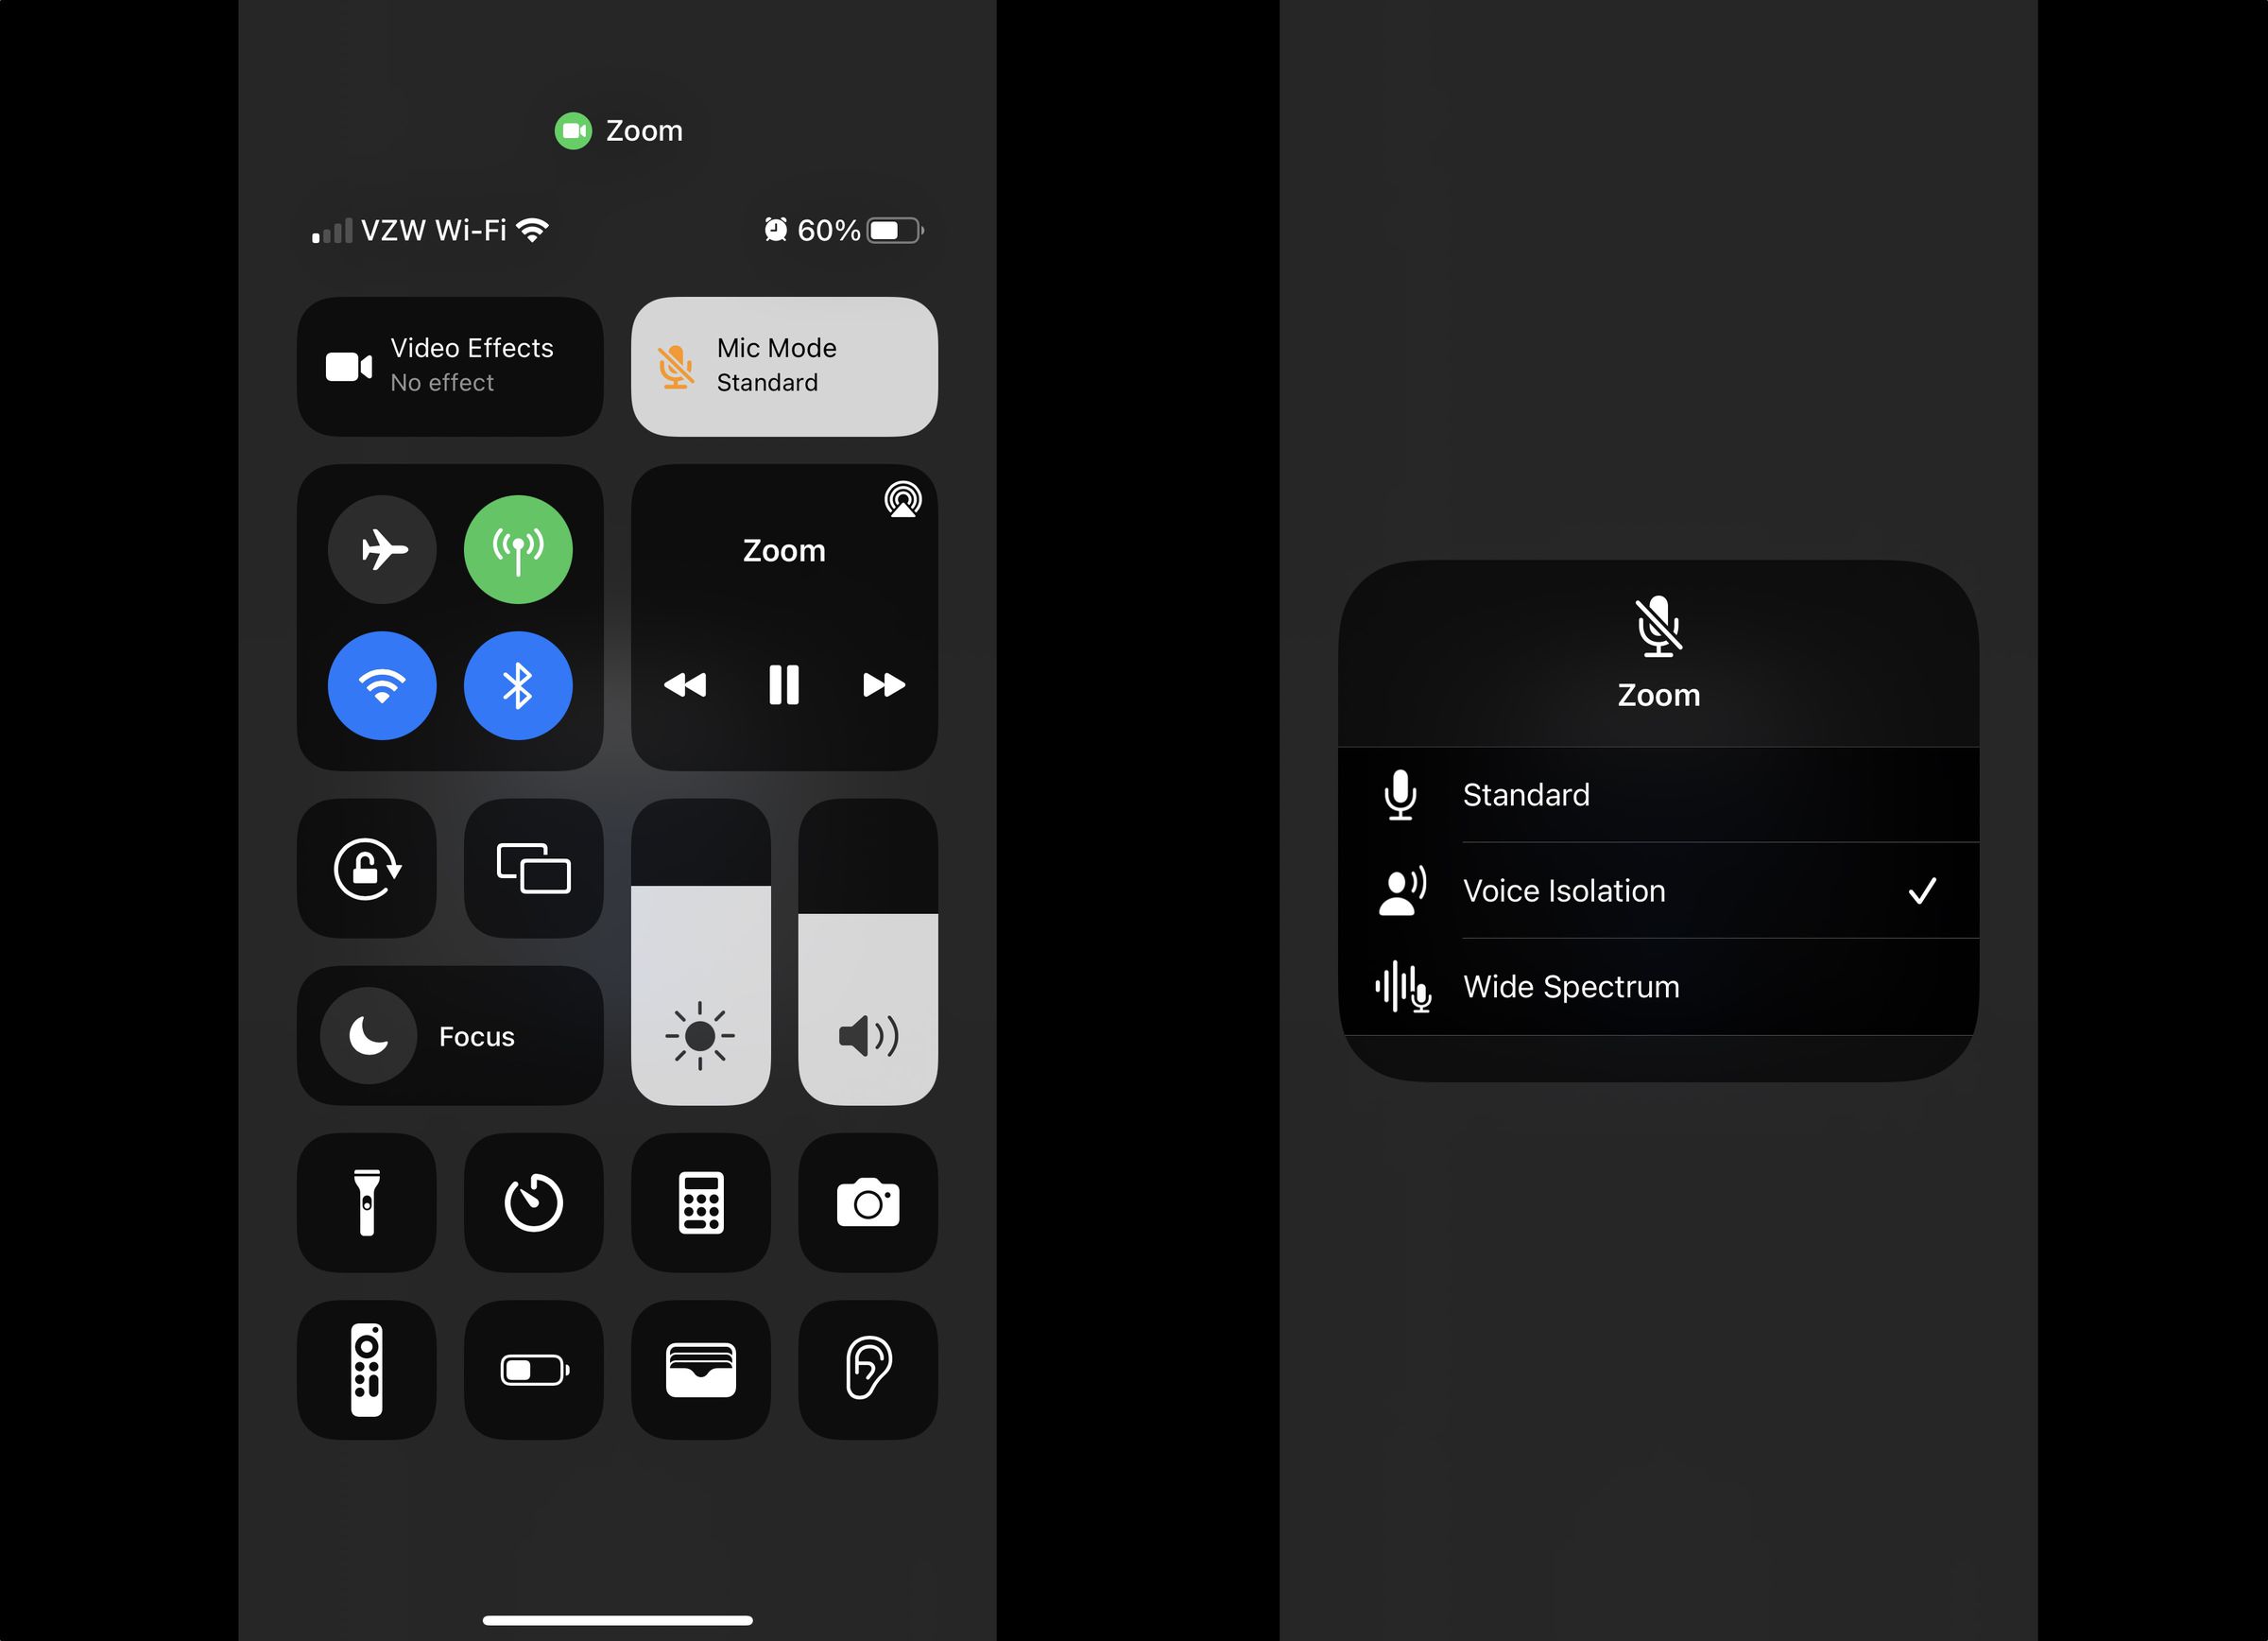 To turn on Voice Isolation, open up Control Center while you’re on a call.